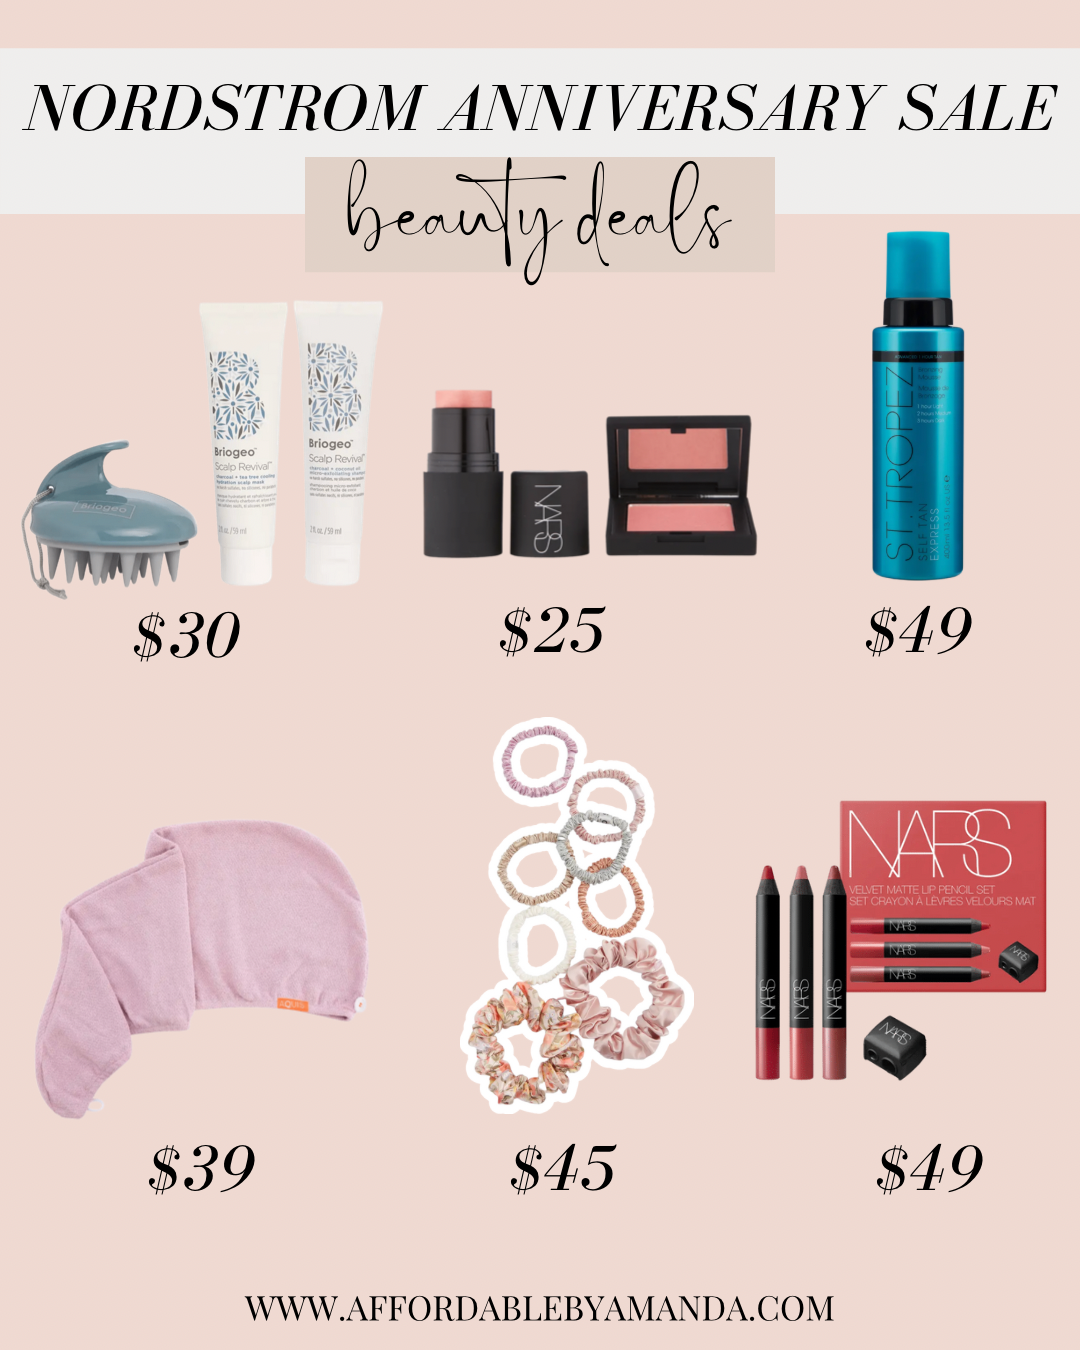 Nordstrom Anniversary Beauty Sales Exclusives - Nordstrom Anniversary Sale Beauty Deals - Nordstrom Beauty Sale 2022